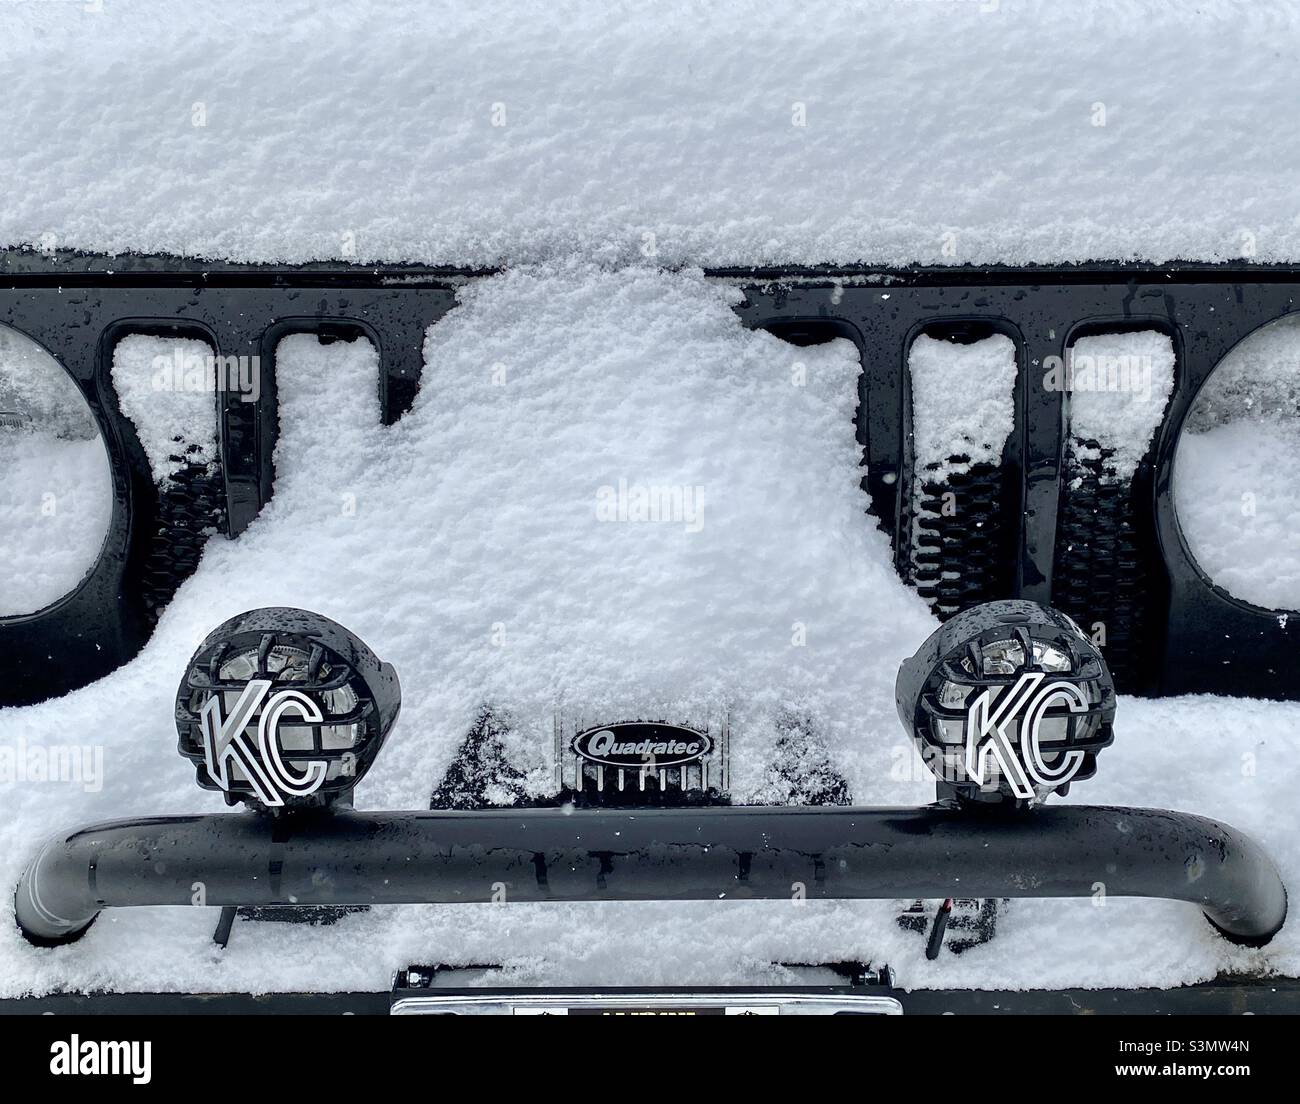 Snow covering the front of a black Jeep Wrangler with winch and off-road lights Stock Photo